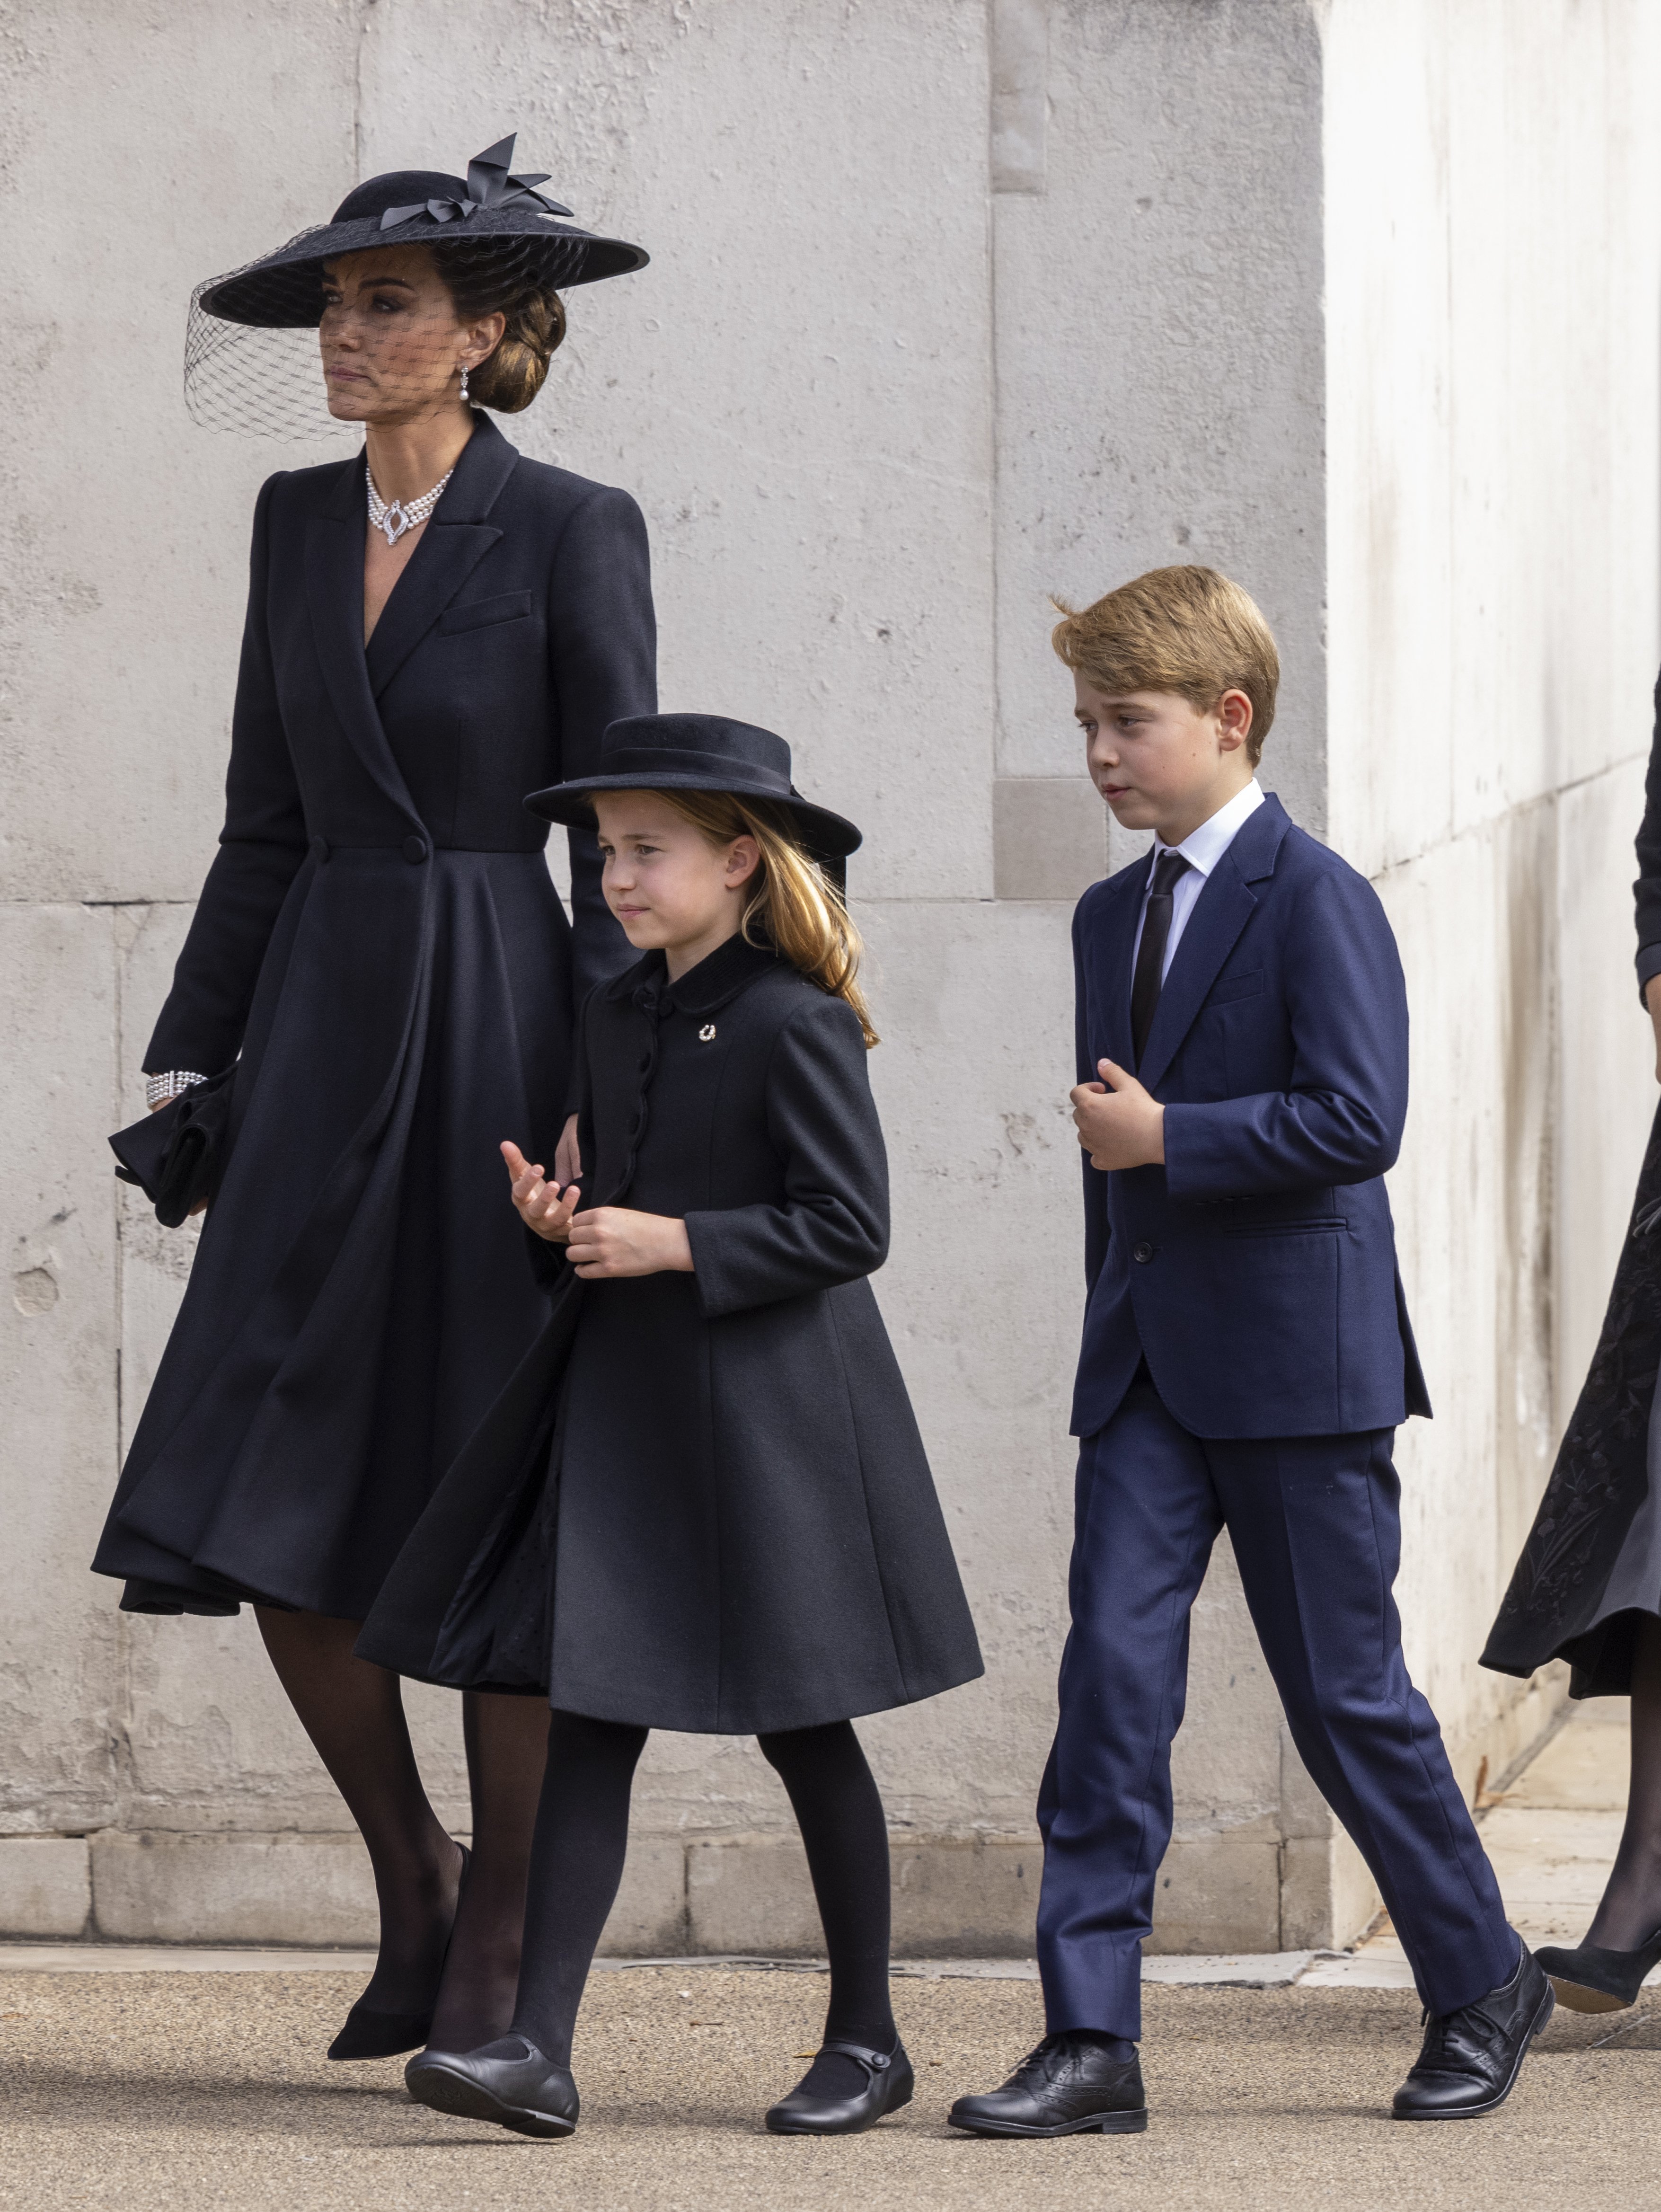 Princess Catherine of Wales, Princess Charlotte of Wales, and Prince George of Wales were seen at Wellington Arch, where the coffin of Queen Elizabeth II was transferred to the hearse for the final trip to Windsor after the State Funeral on September 19, 2022, in London, England. | Source: Getty Images 